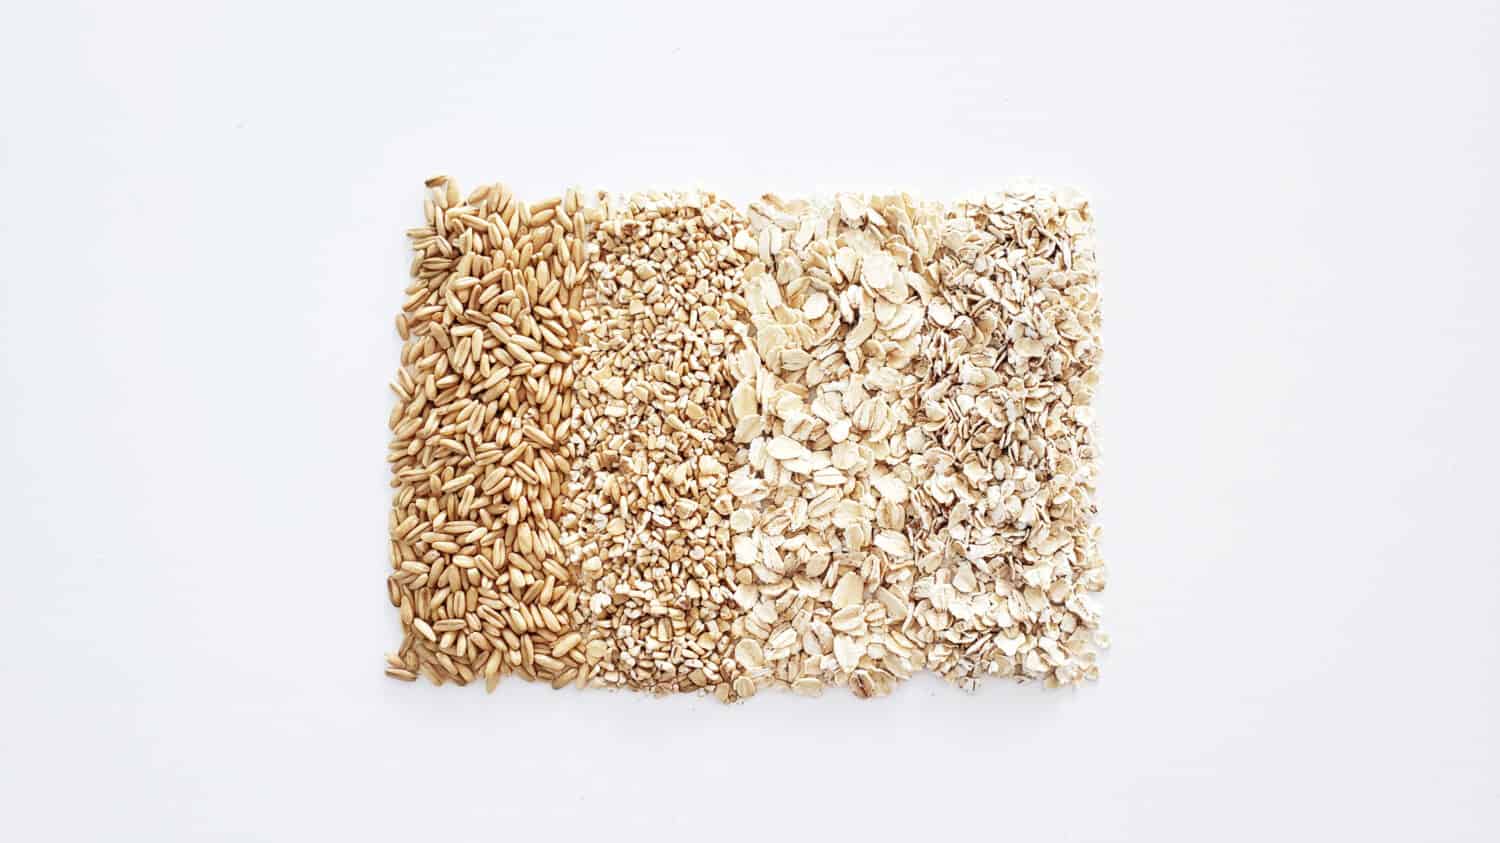 four different types of oats, whole oat, steel cut oat, rolled oat, quick oat on white background